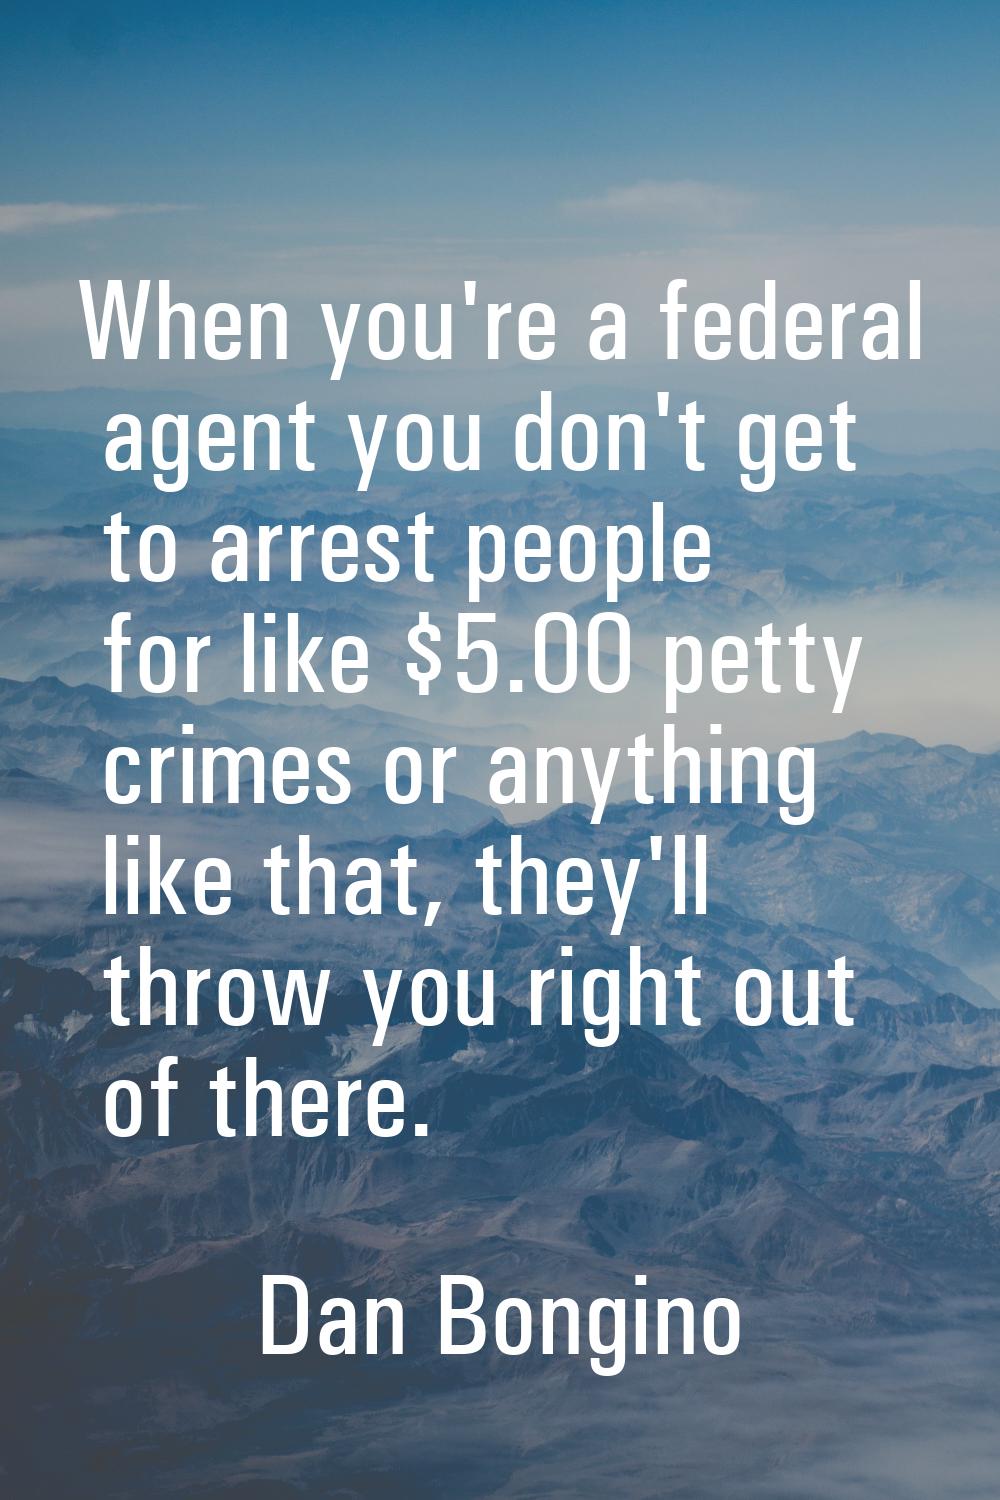 When you're a federal agent you don't get to arrest people for like $5.00 petty crimes or anything 